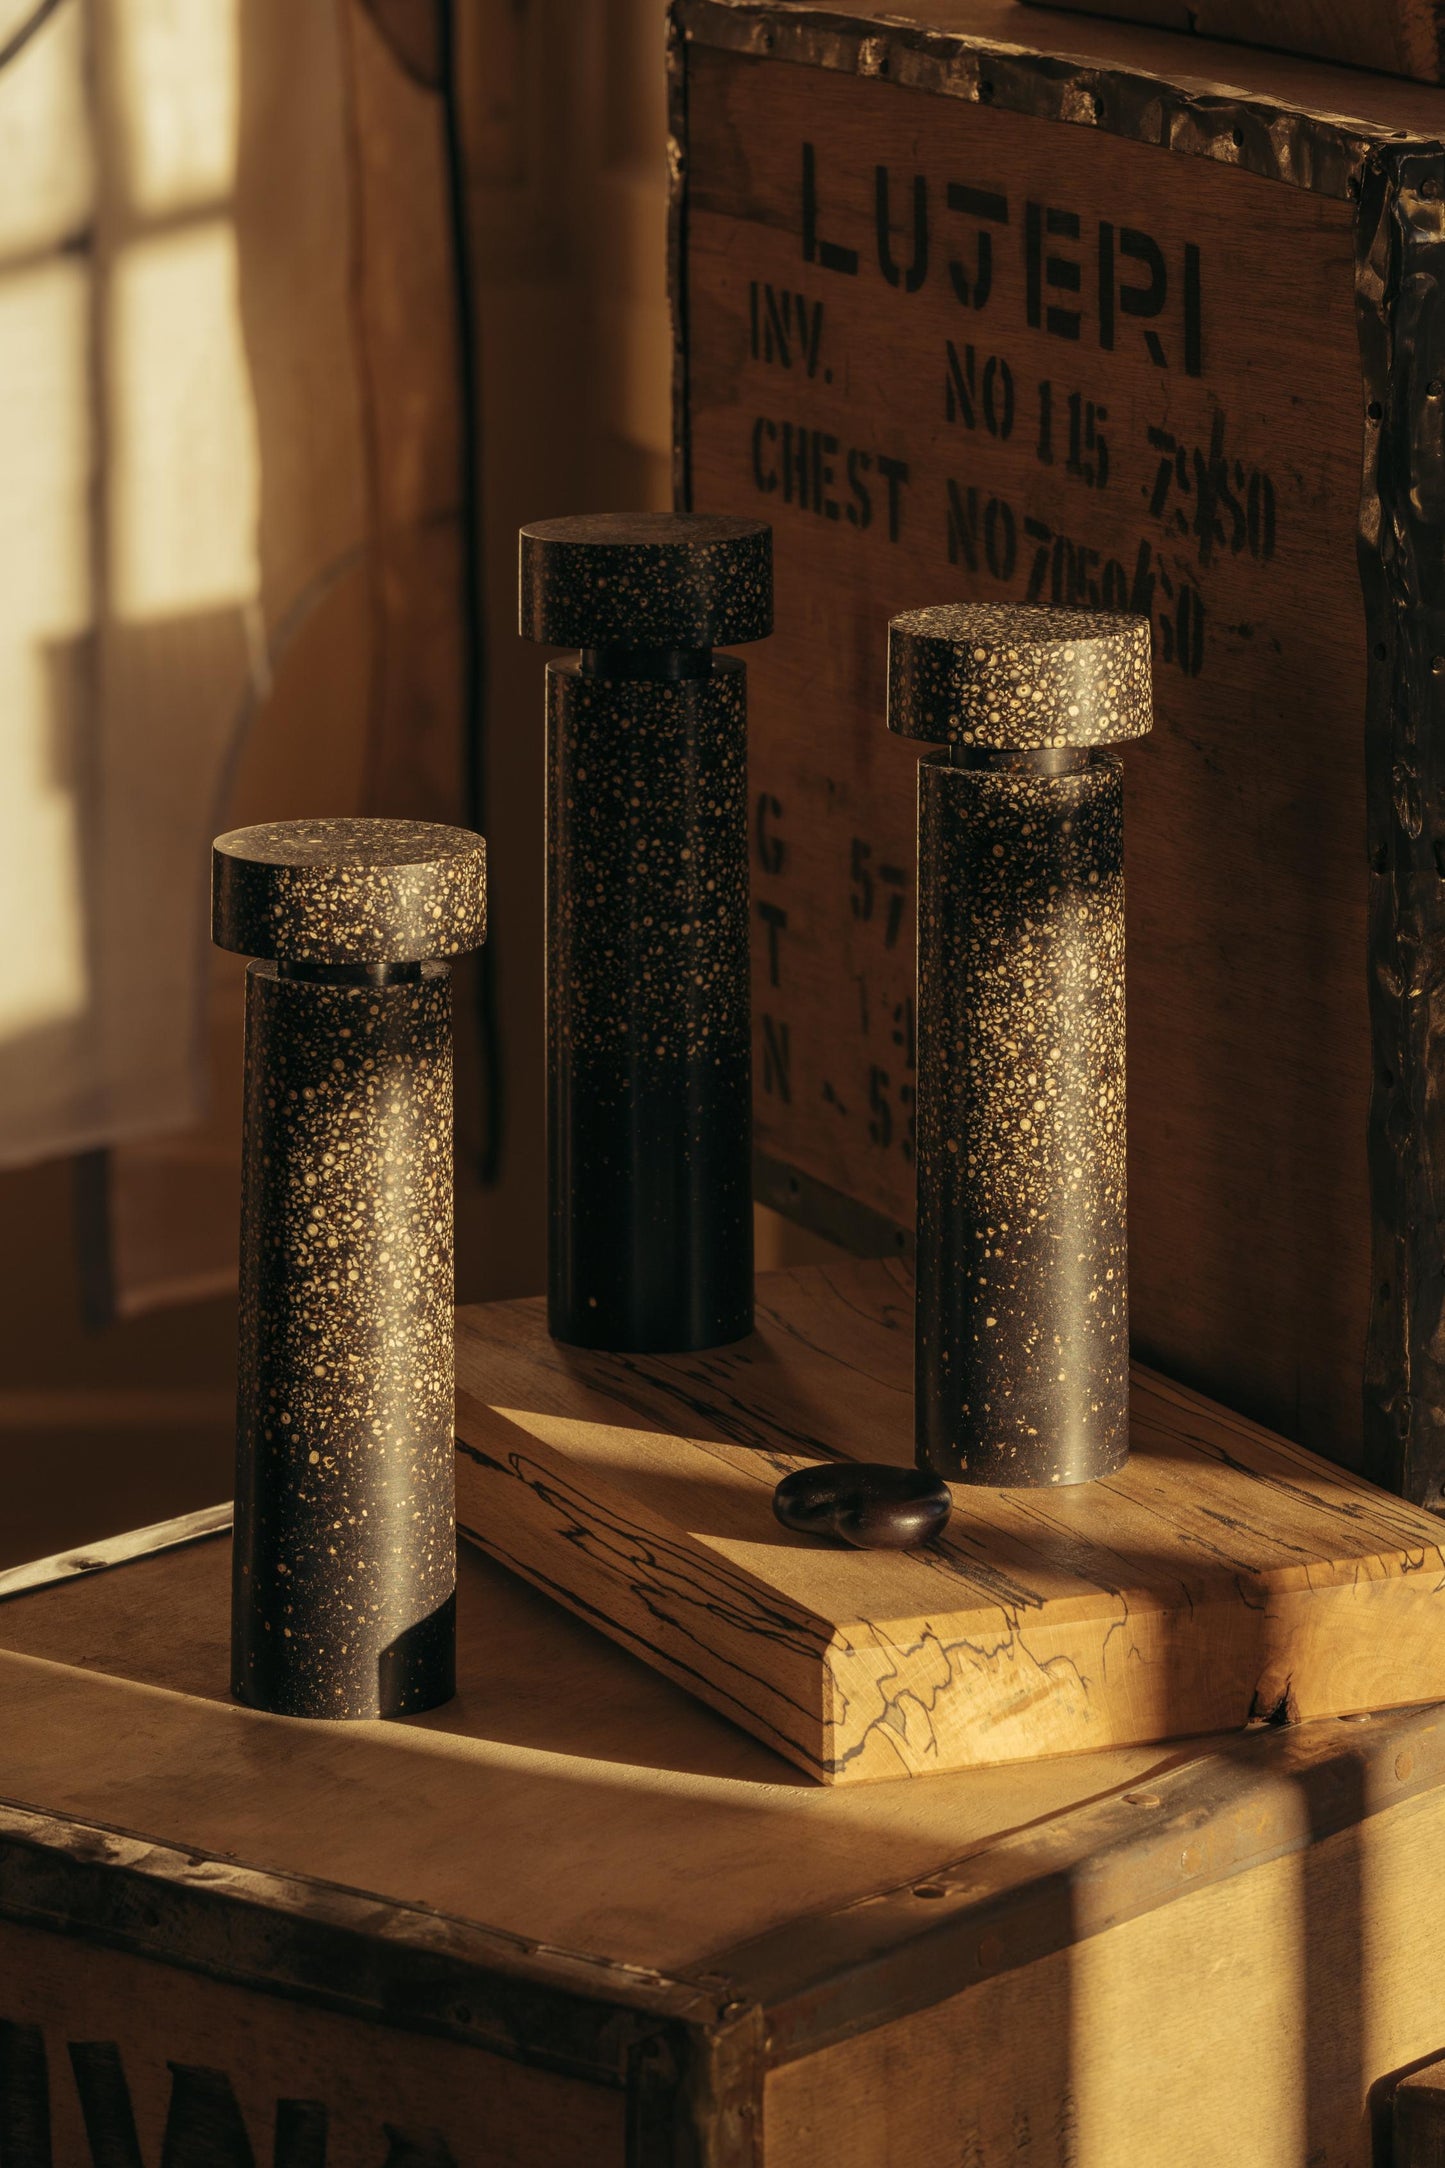 ALT= Three Pepper Pepper Mills by Marc Sweeney. Drenched in sunlight at Bard Scotland in Leith. 